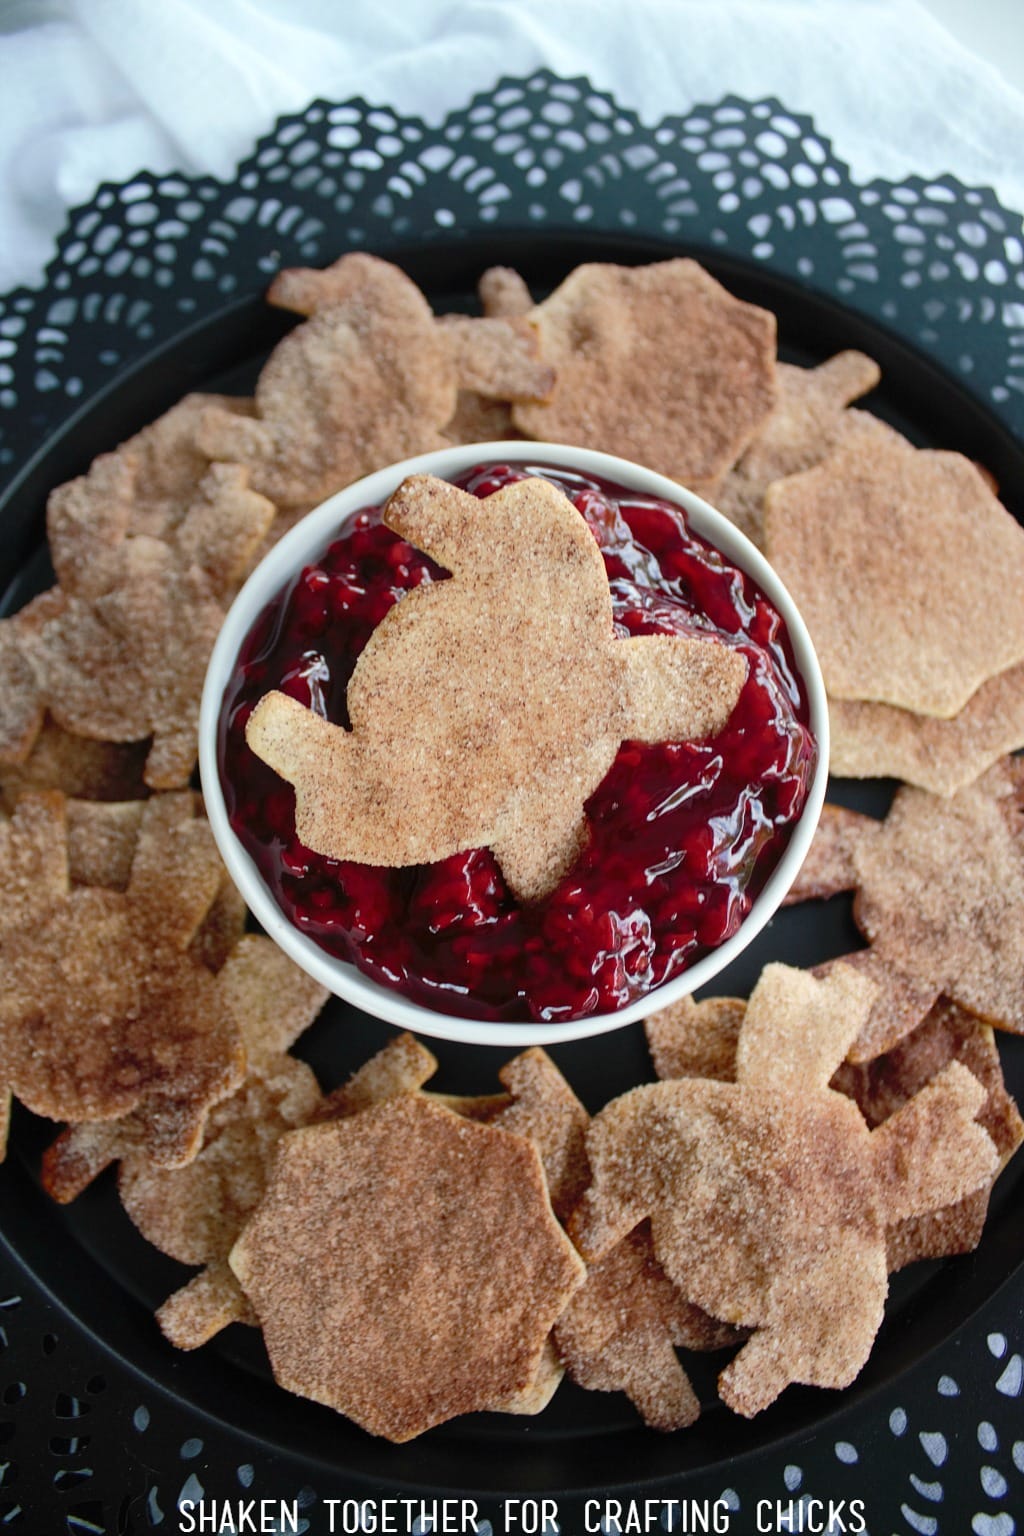 Cinnamon Sugar Spider Chips are delightfully dunkable - especially into raspberry 'guts'!